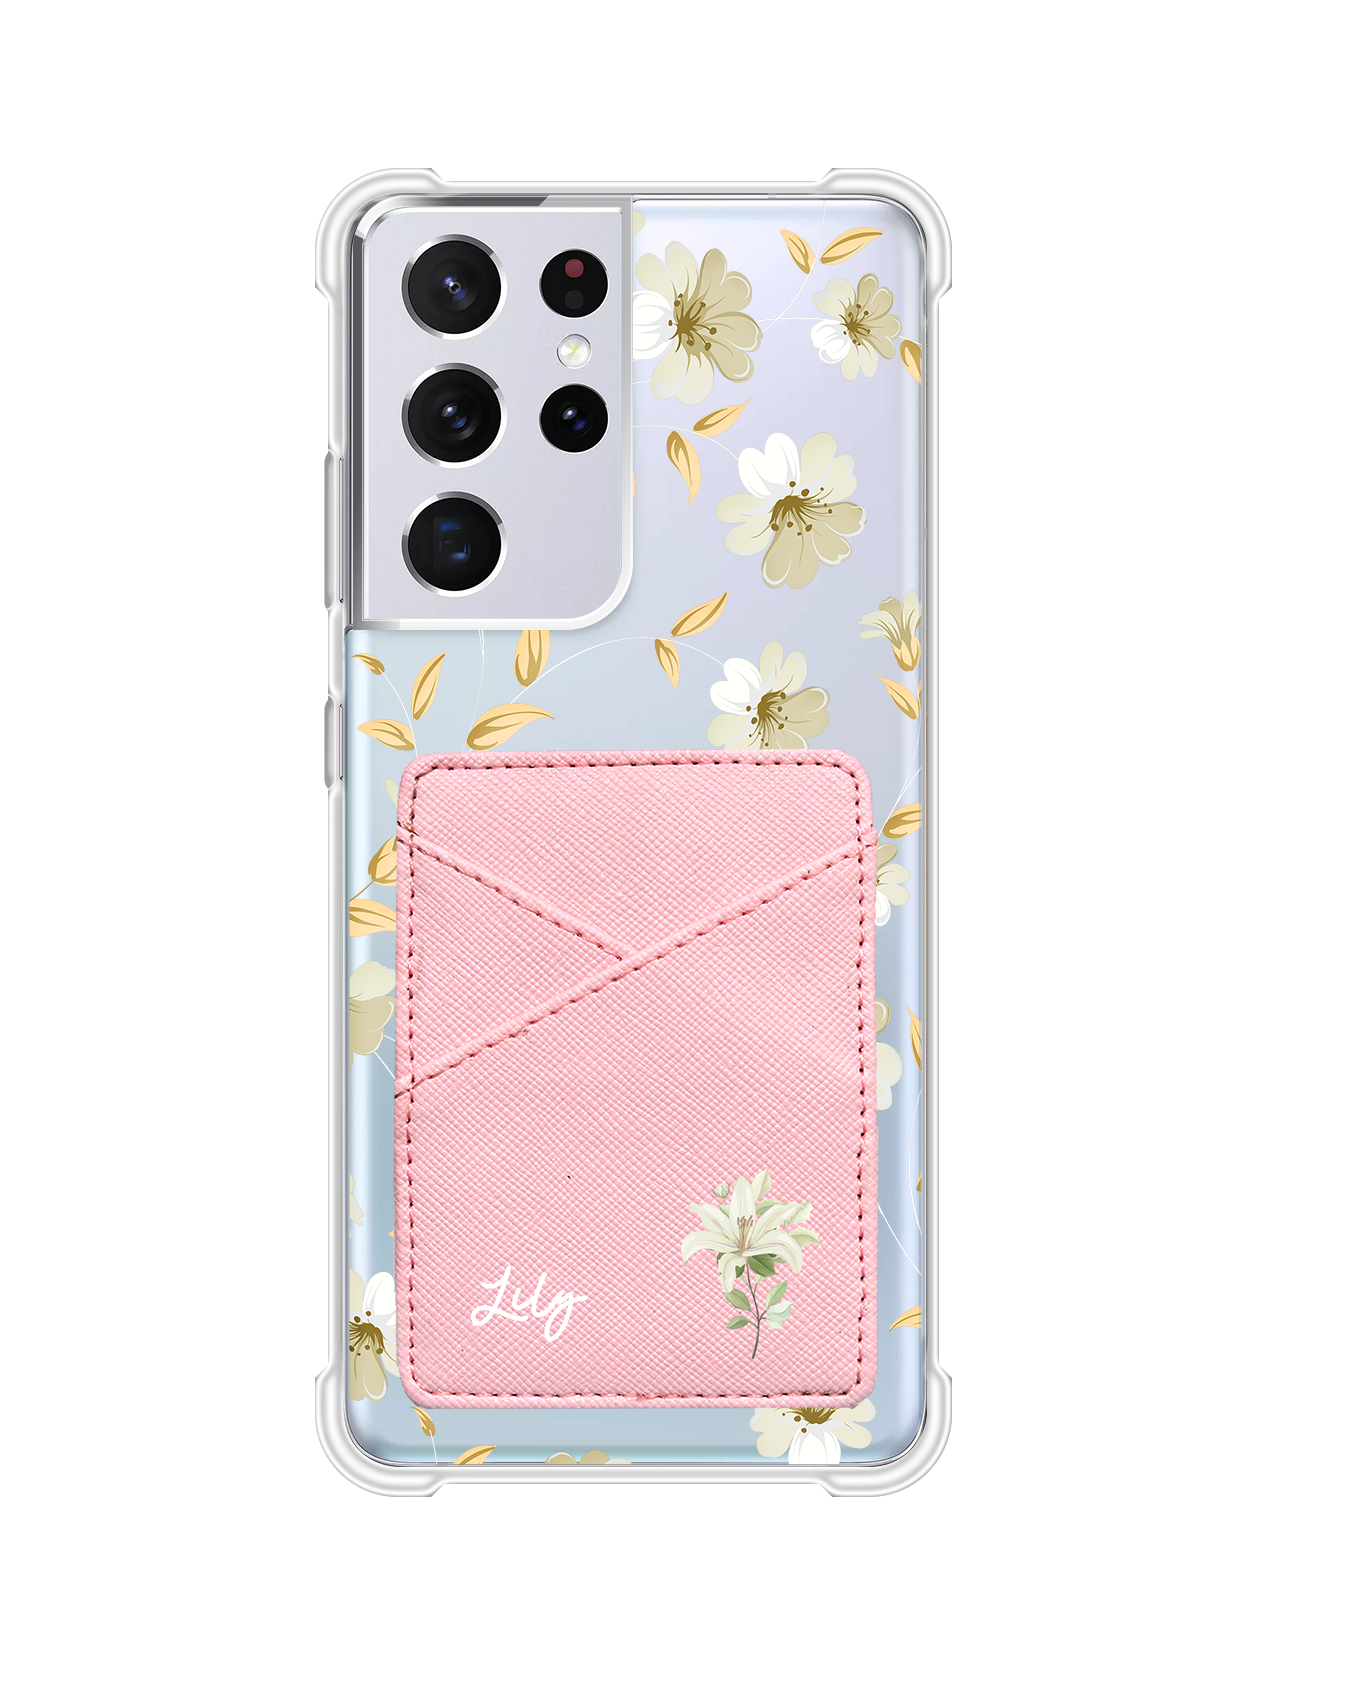 Android Phone Wallet Case - White Magnolia